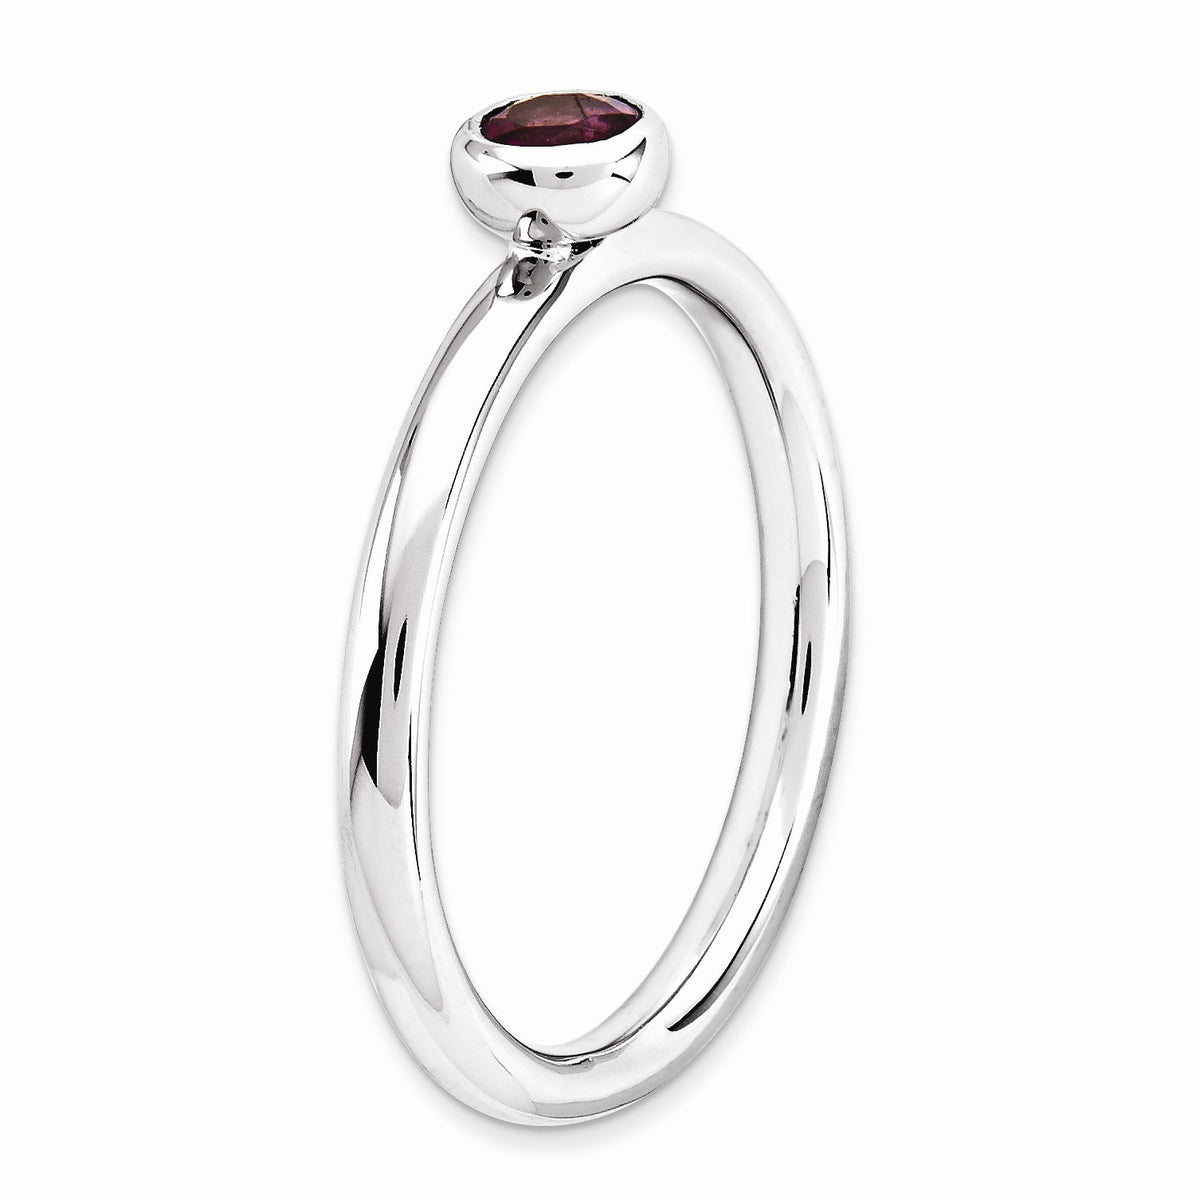 Alternate view of the Stackable Low Profile 4mm Rhodolite Garnet Silver Ring by The Black Bow Jewelry Co.